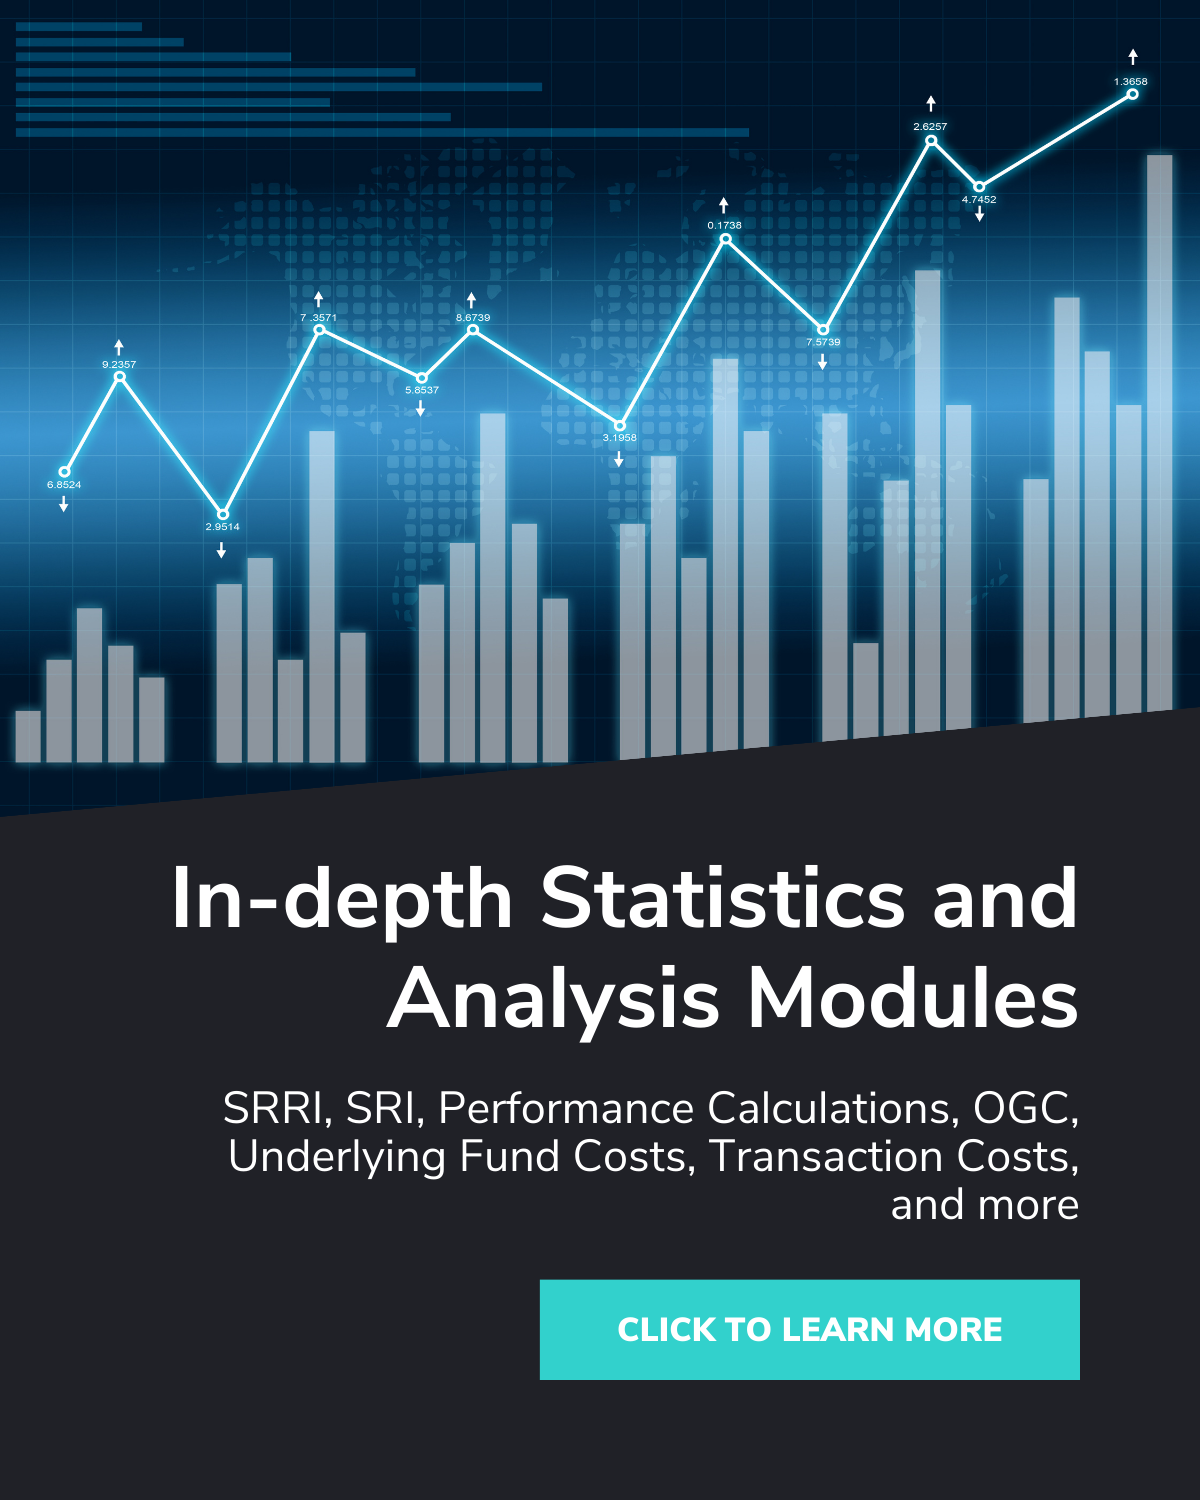 In-depth Statistics and Analysis Modules